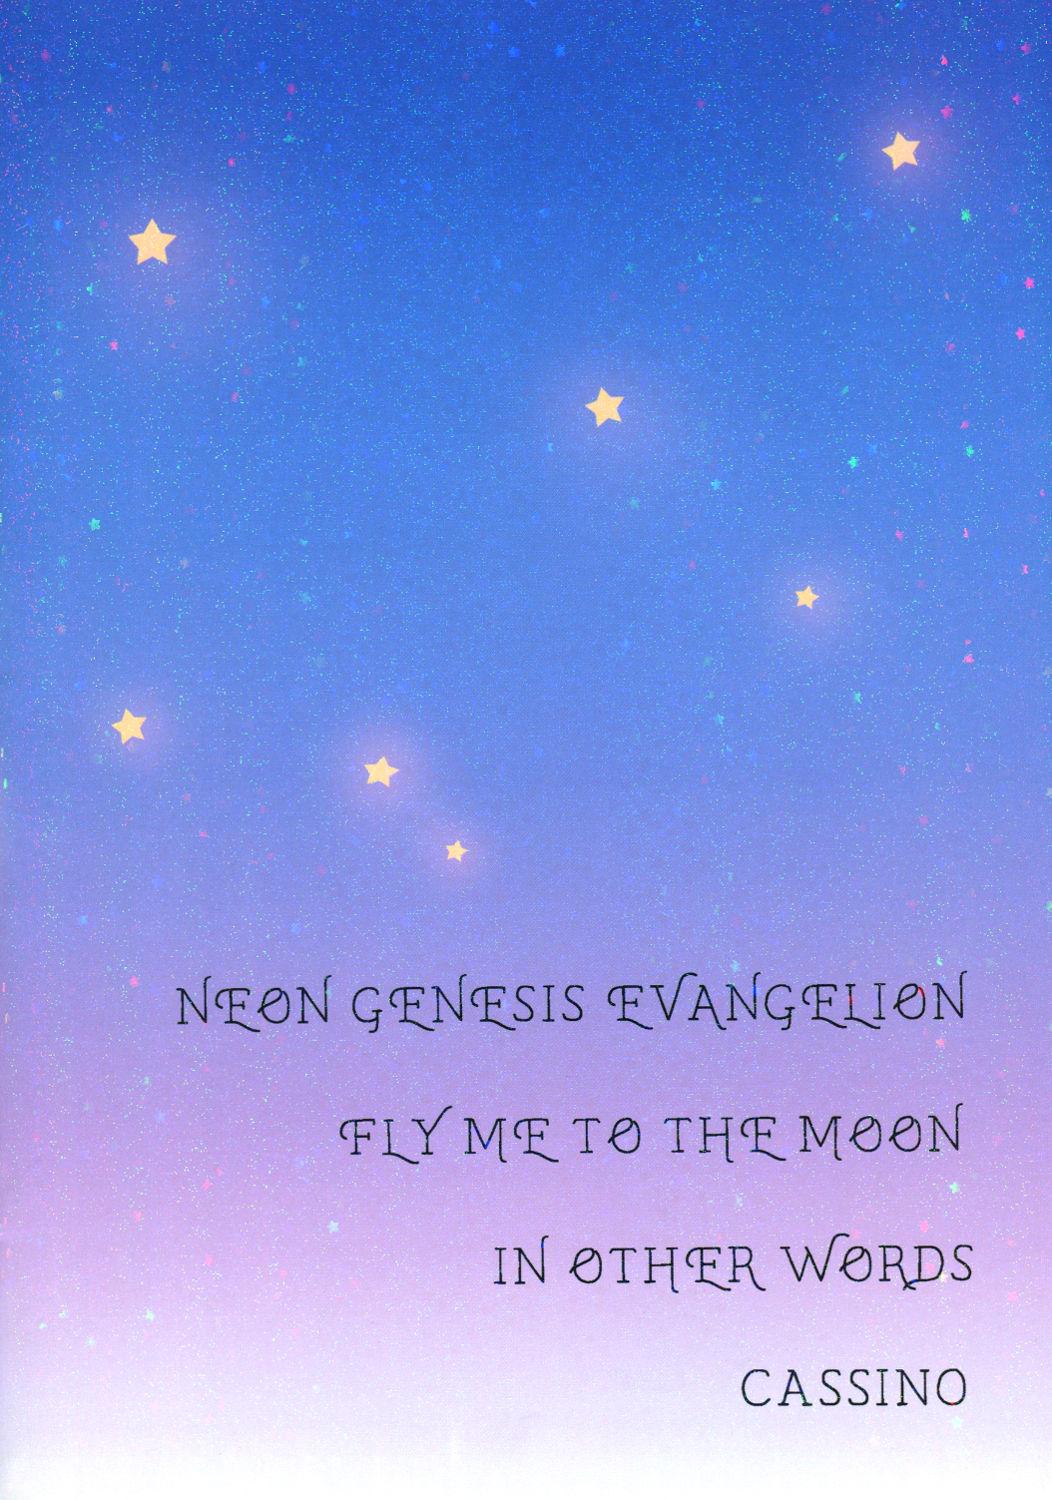 Bangbros FLY ME TO THE MOON - Neon genesis evangelion Amateur Sex - Page 43